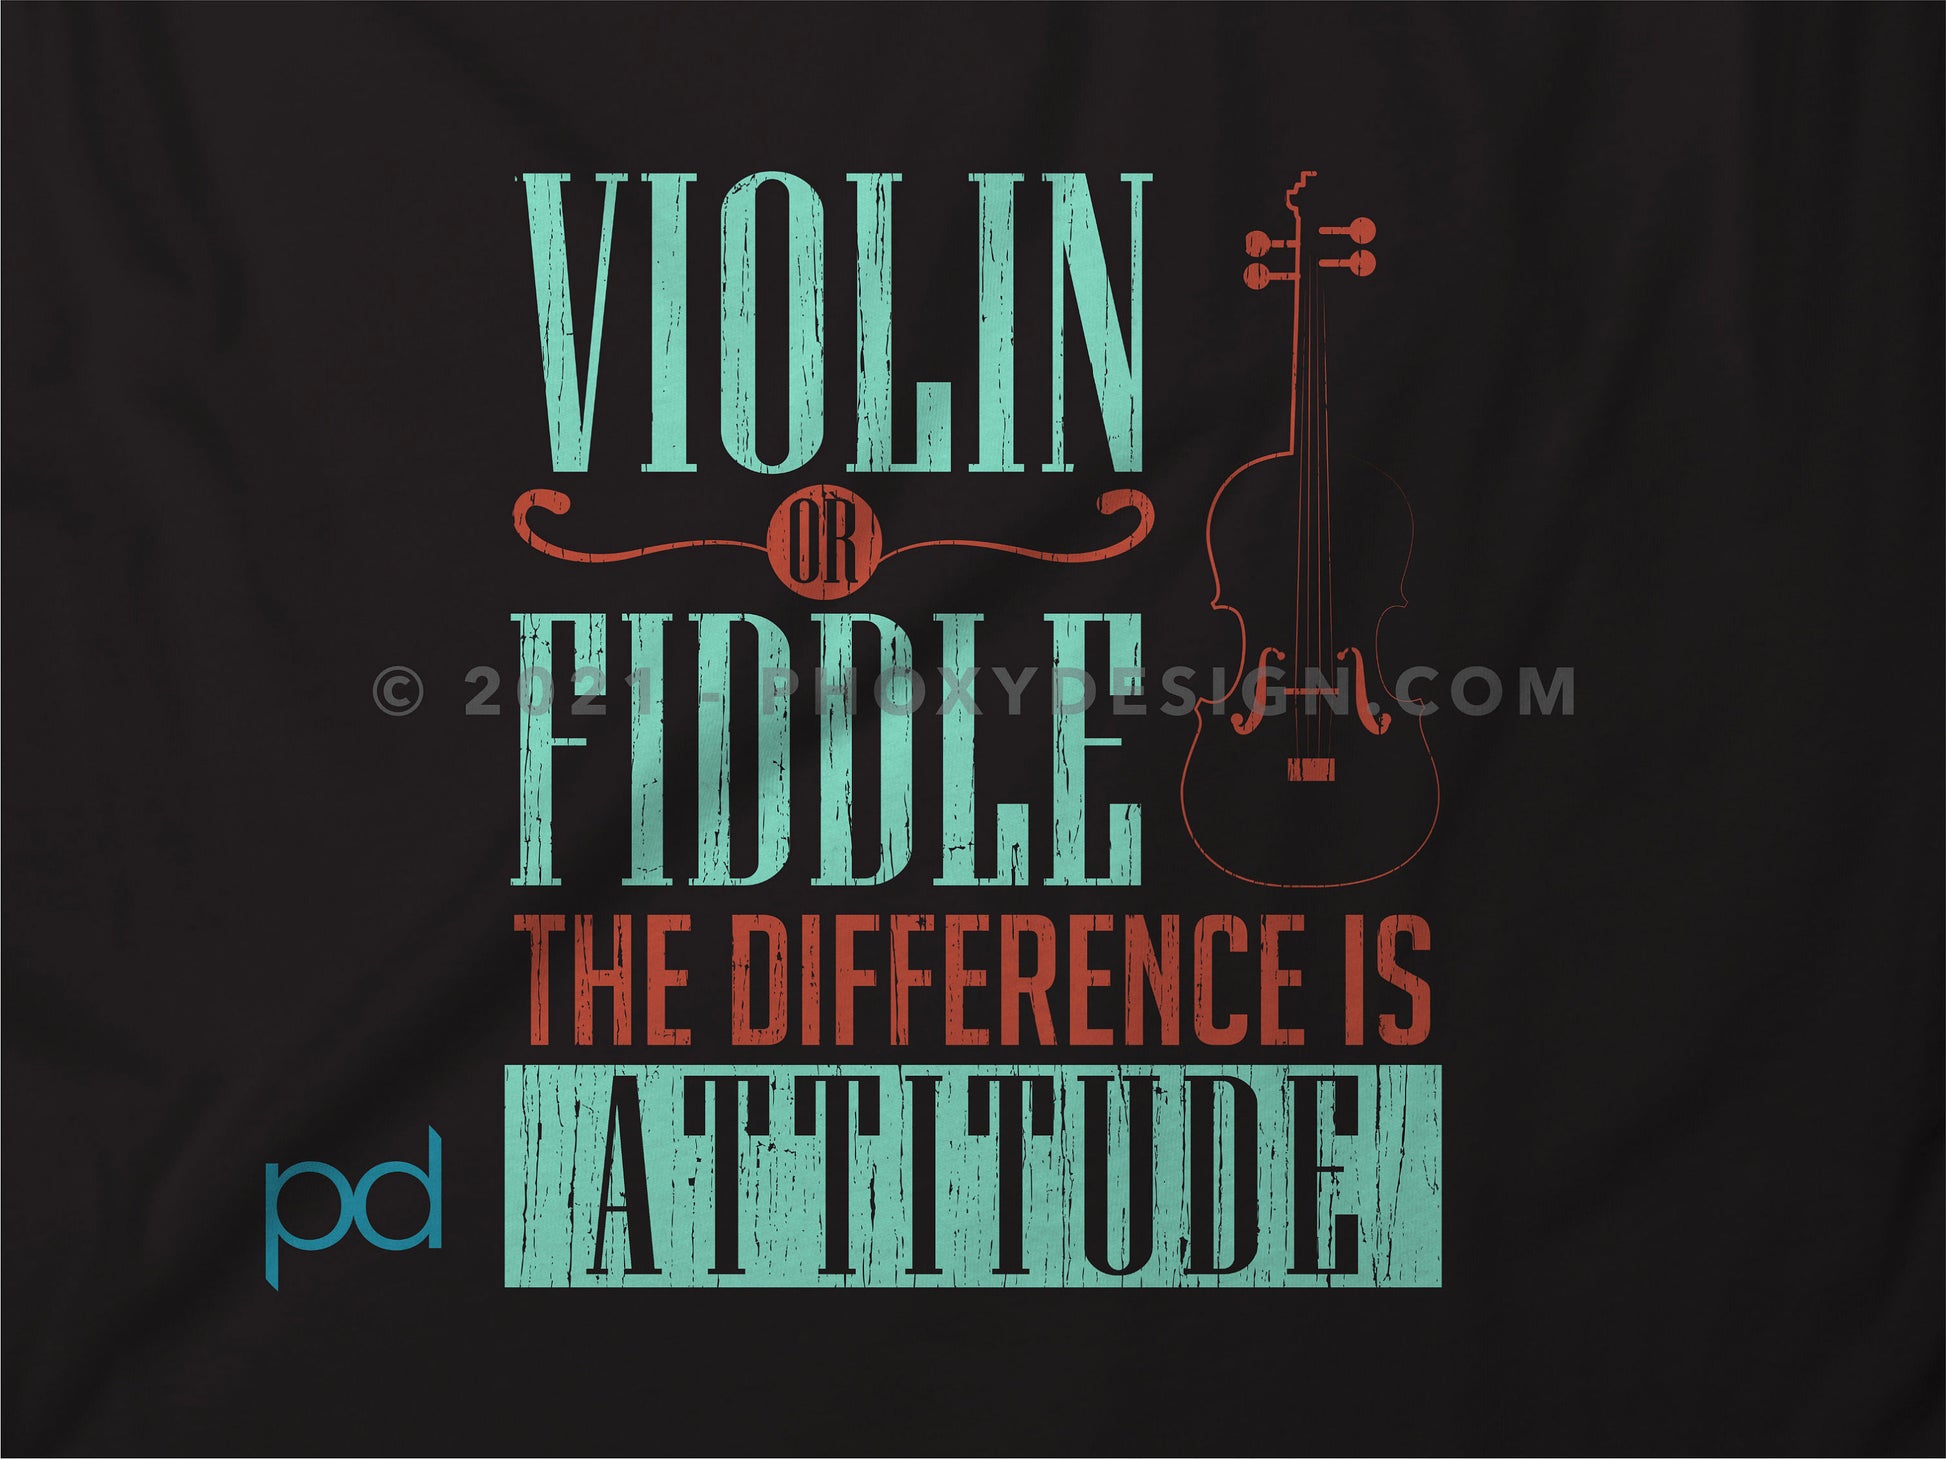 Funny Violin T-Shirt, Violinist Fiddle Player Gift Idea Tee Shirt Top, Violin or Fiddle Dilemma The Difference Is Attitude